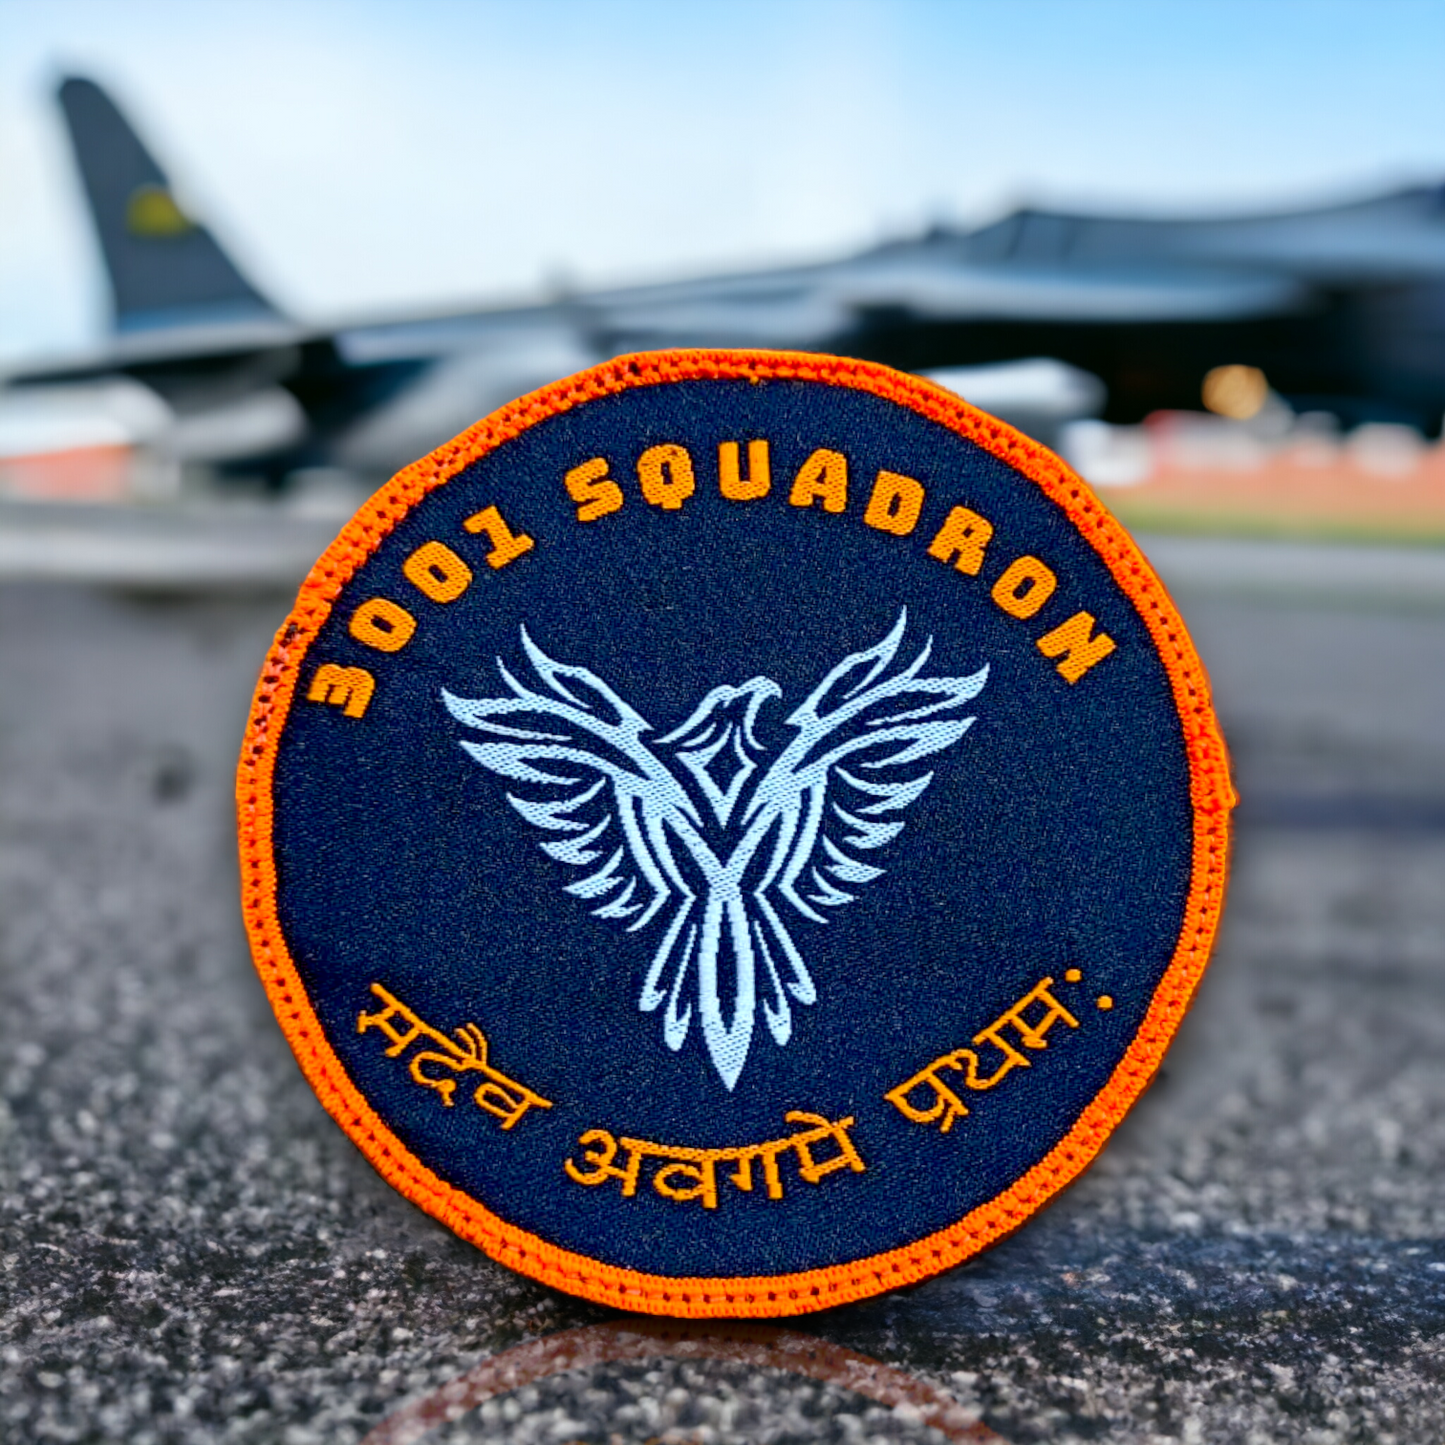 3001 squadron velcro patches for jackets